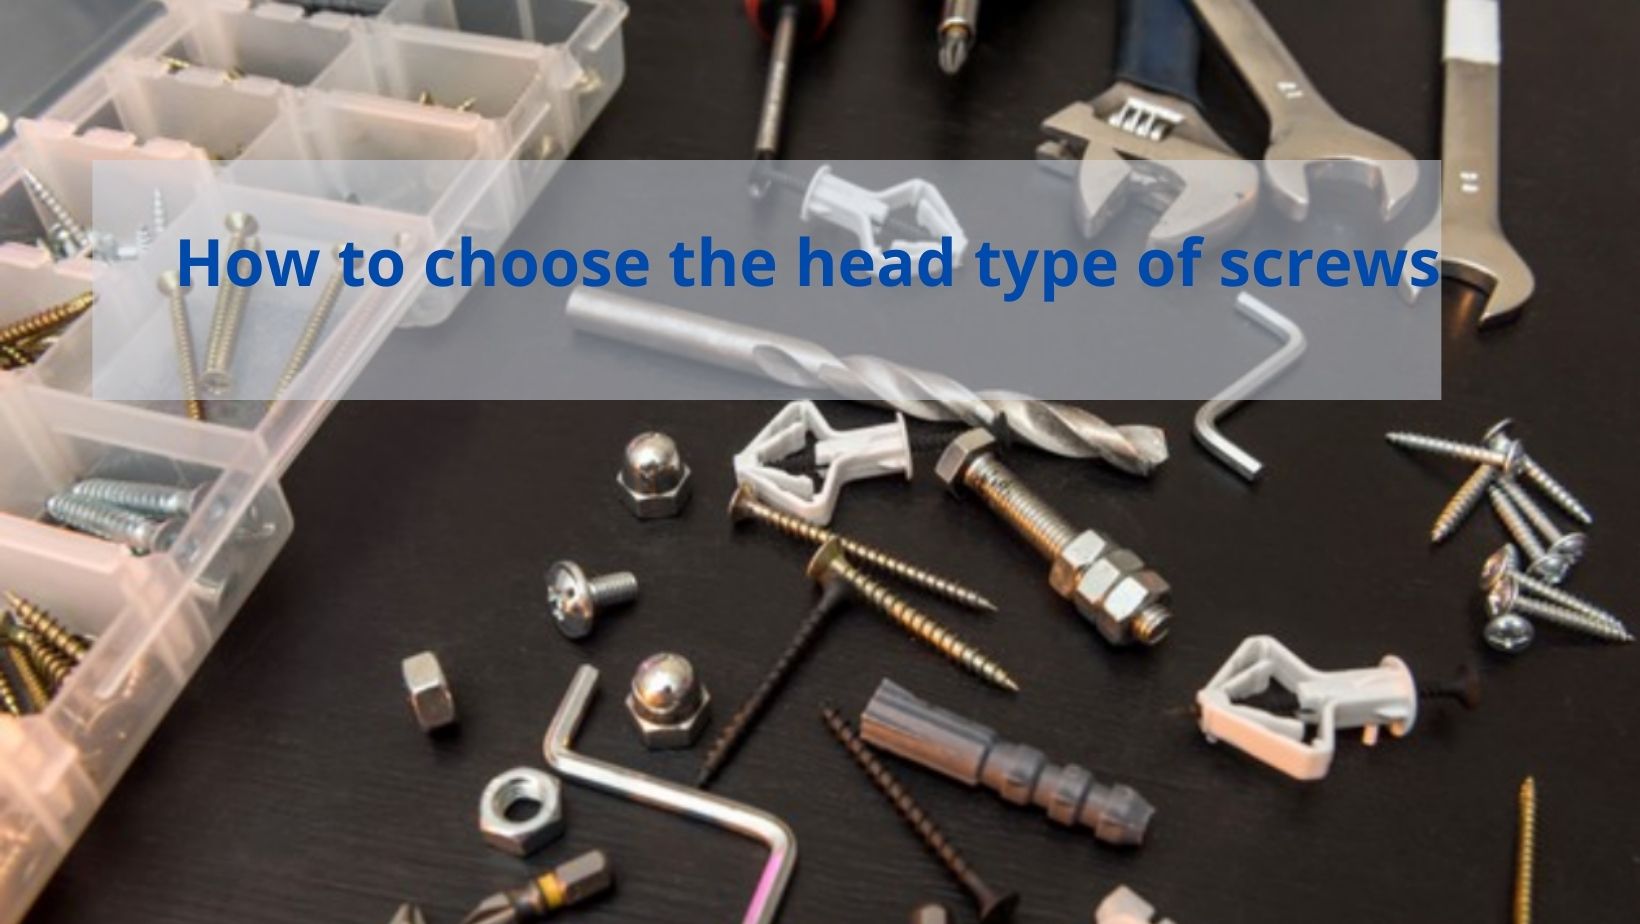 How to choose the head type of screws